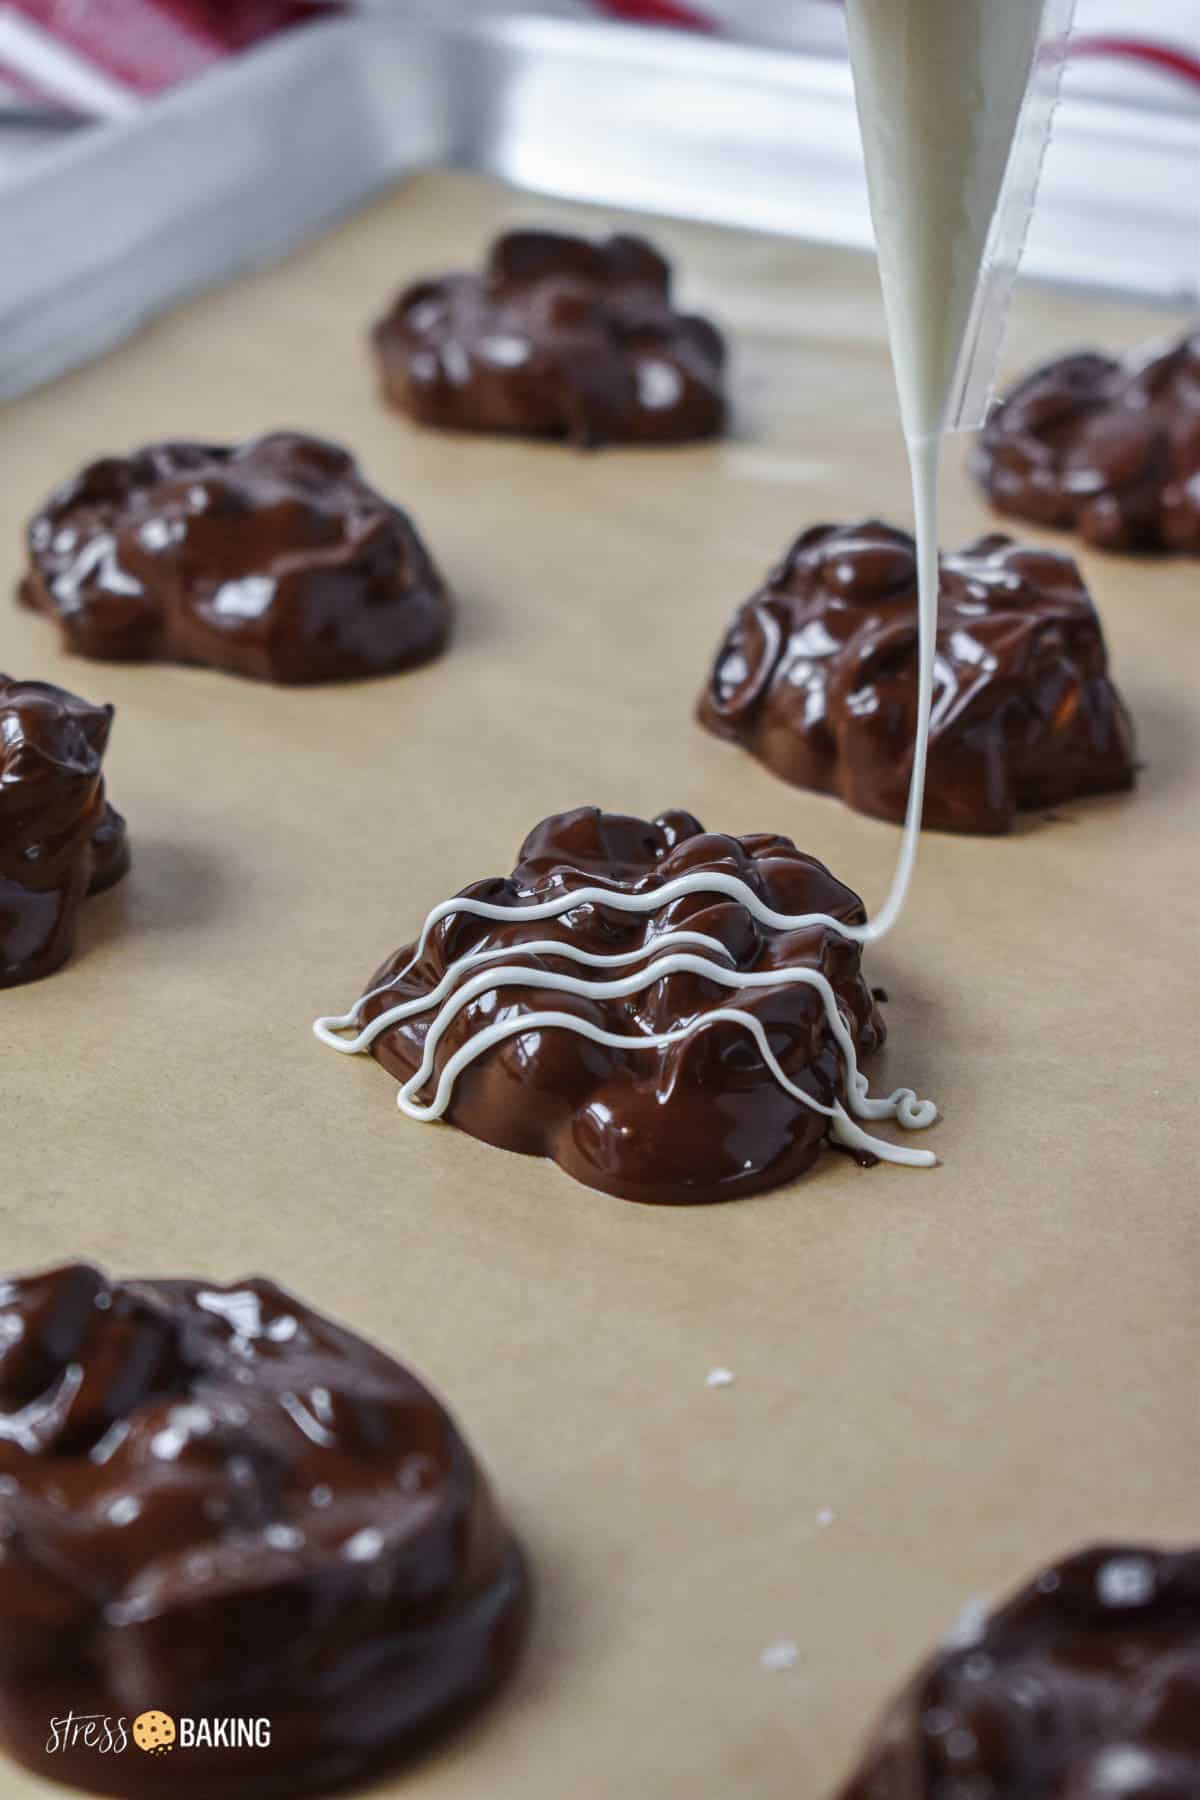 White chocolate being drizzled onto chocolate covered peanut clusters on a parchment paper-lined baking sheet